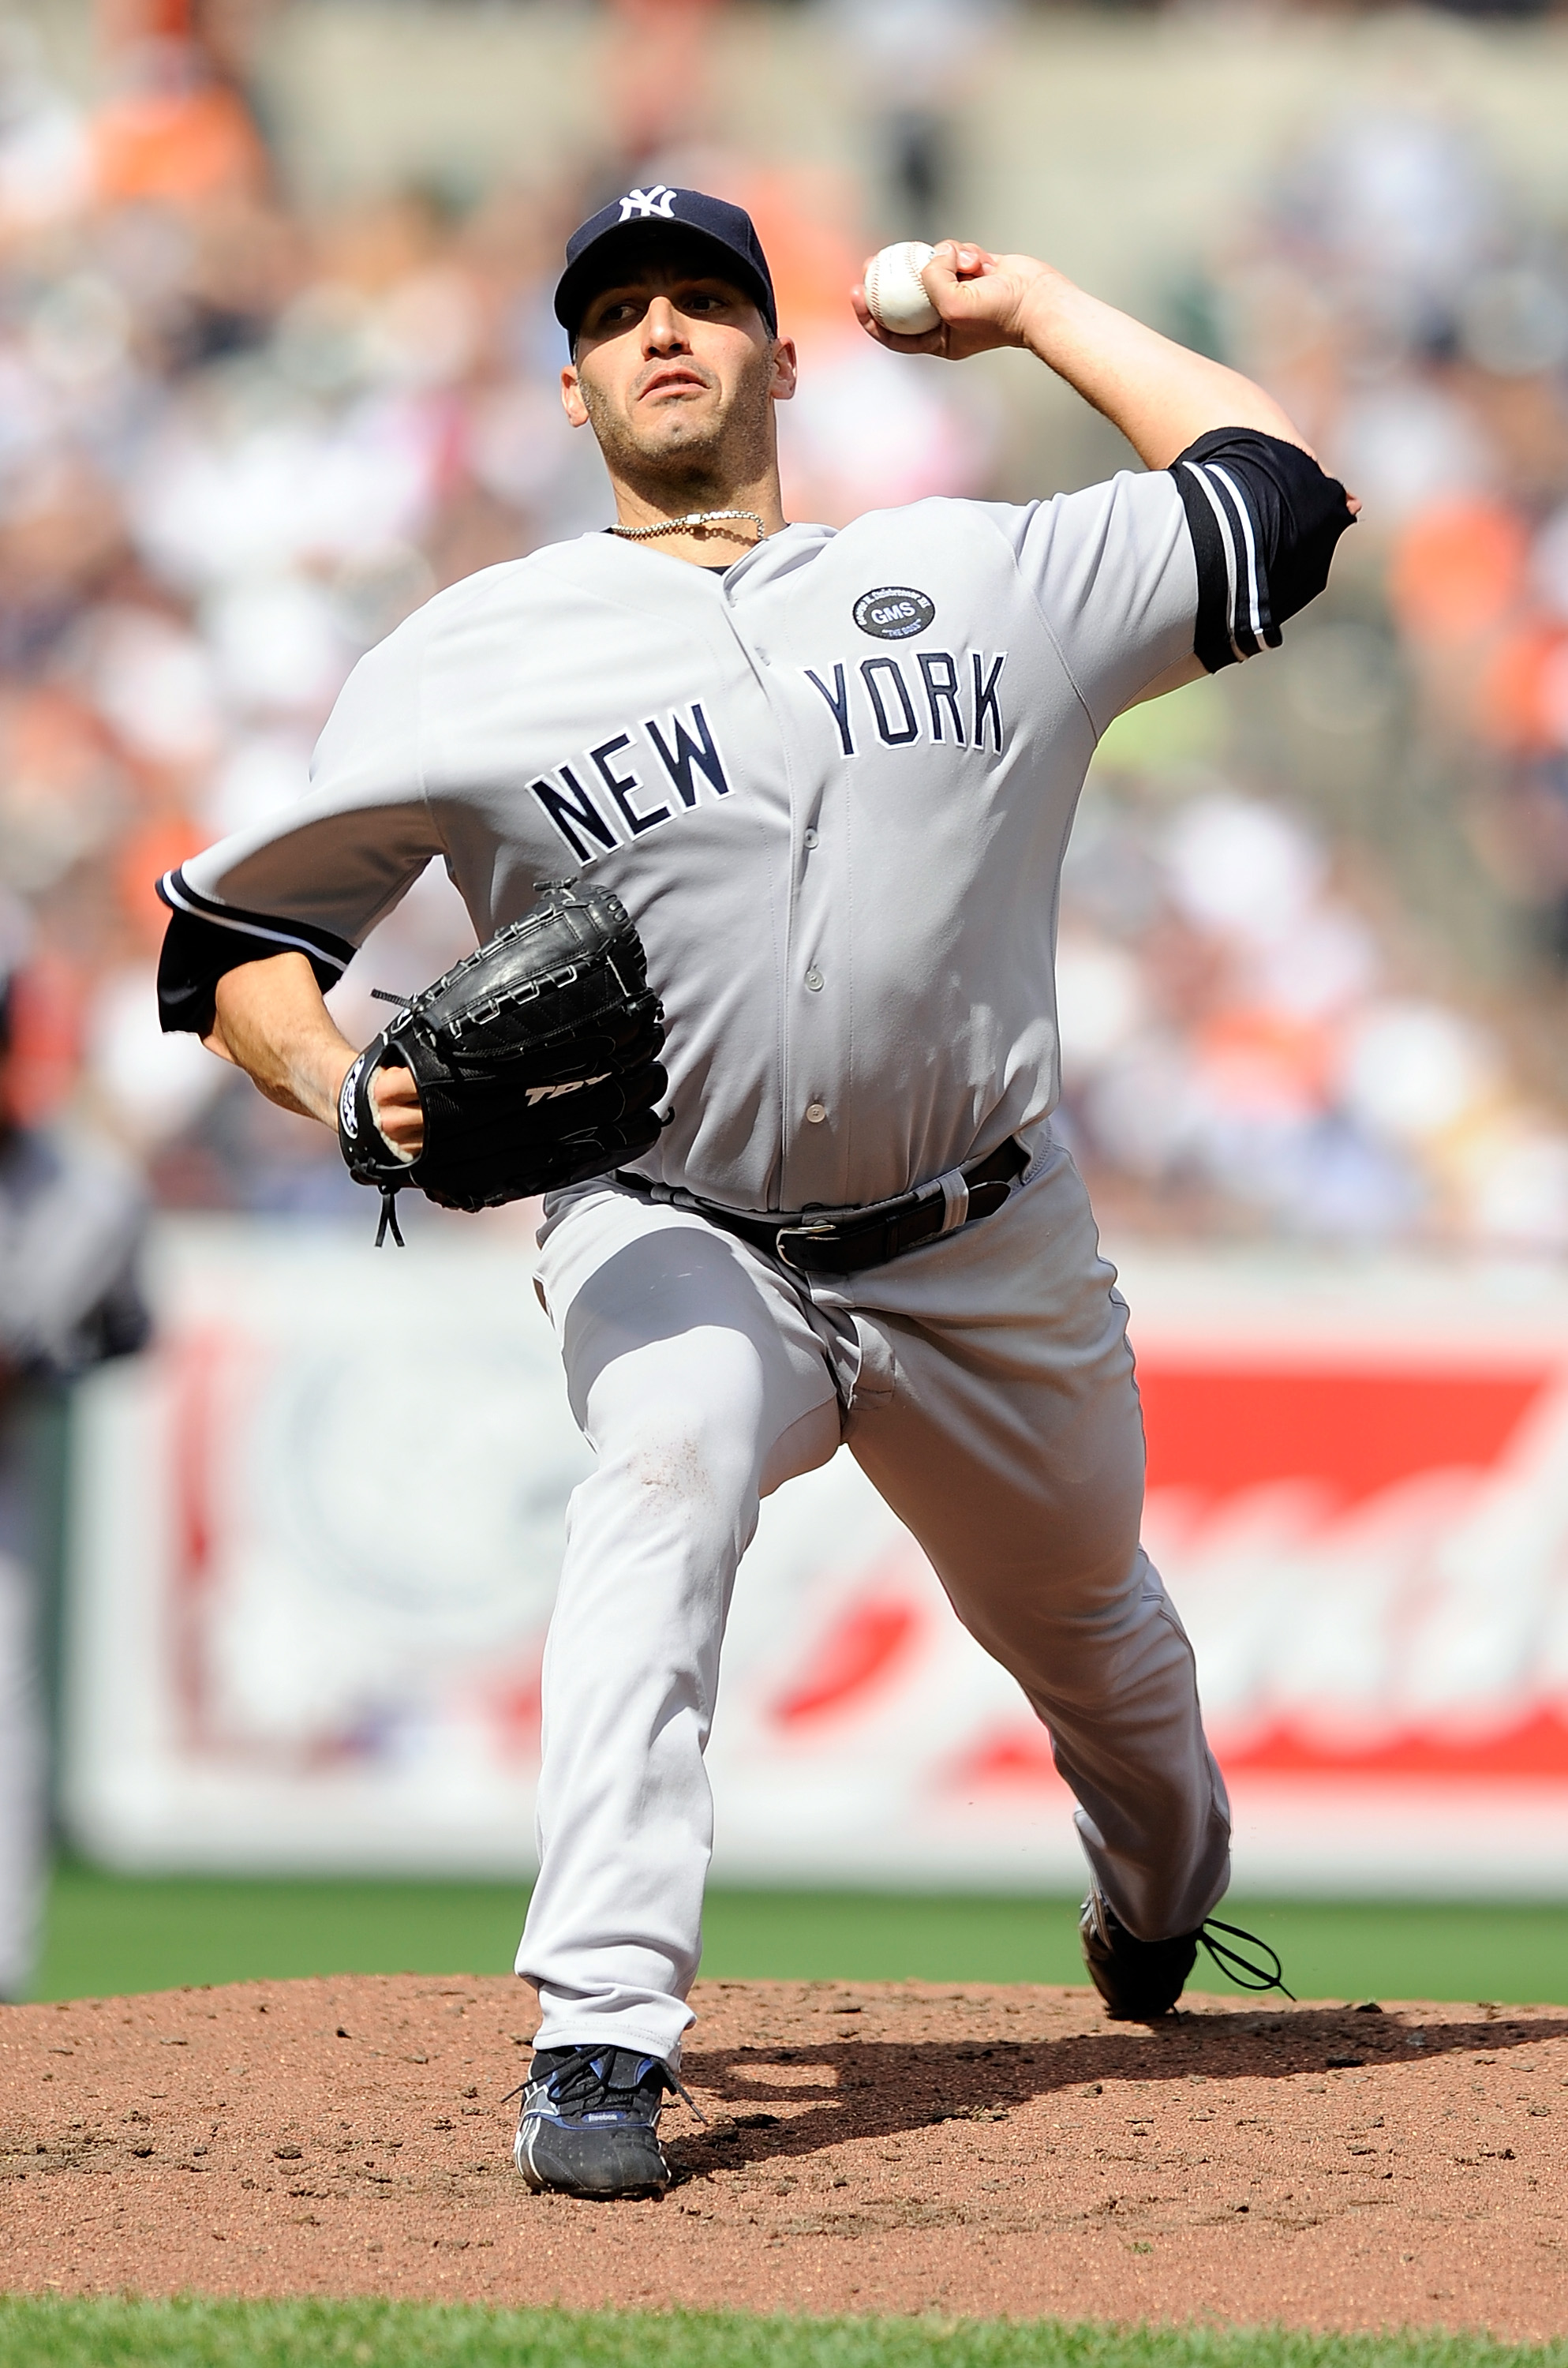 Andy Pettitte announces retirement from Yankees: 'We've had a good run here  and my time is done' – New York Daily News